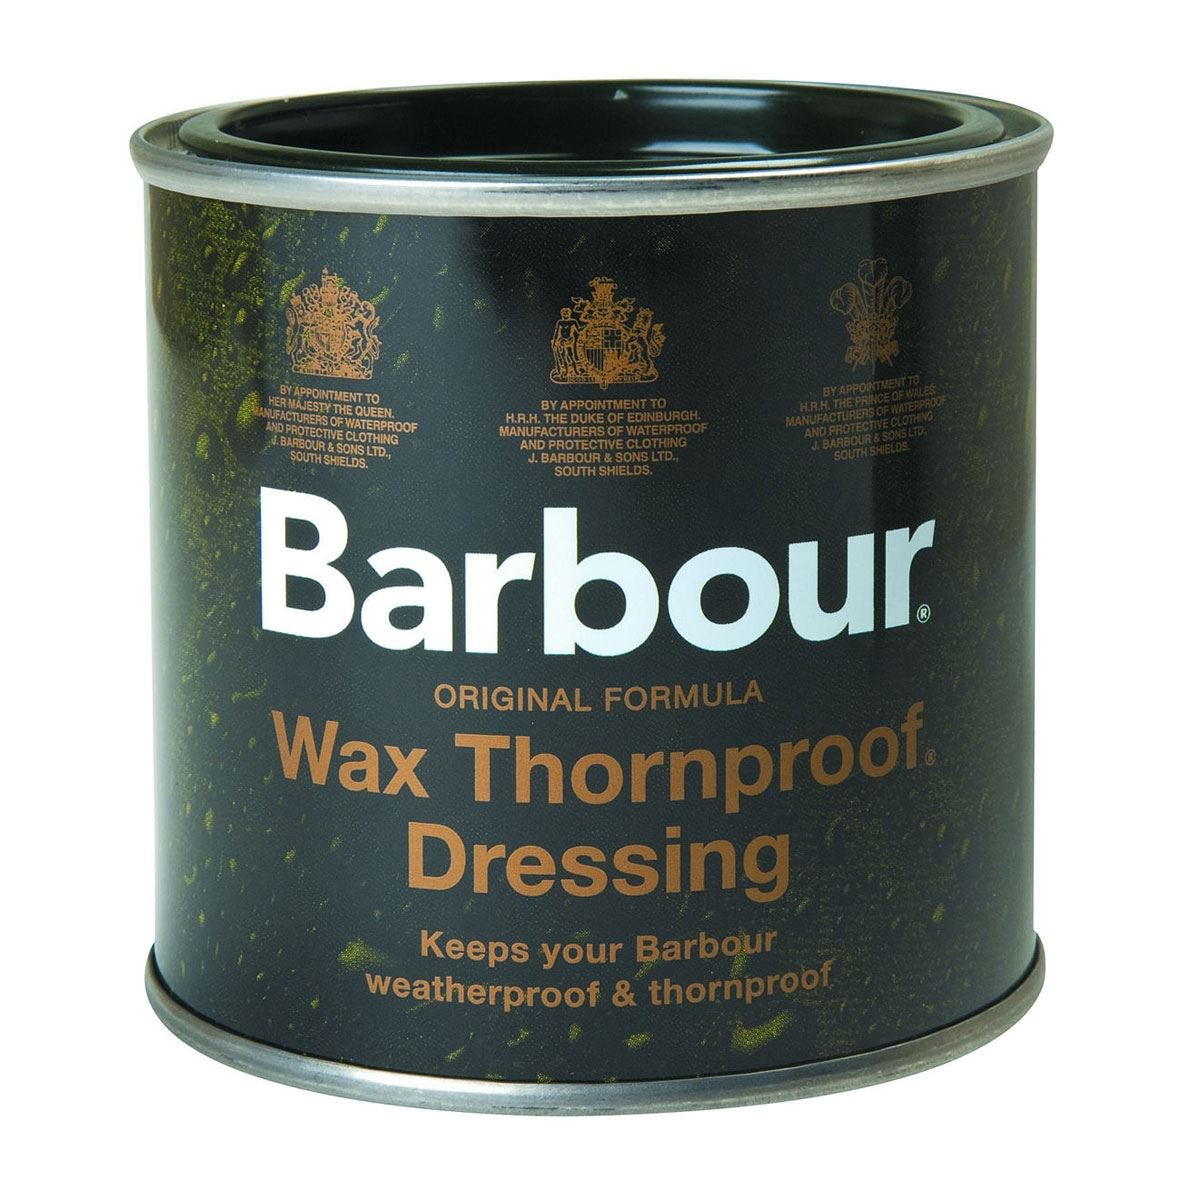 Does Barbour wax repair and re-wax jackets with Barbour wax?